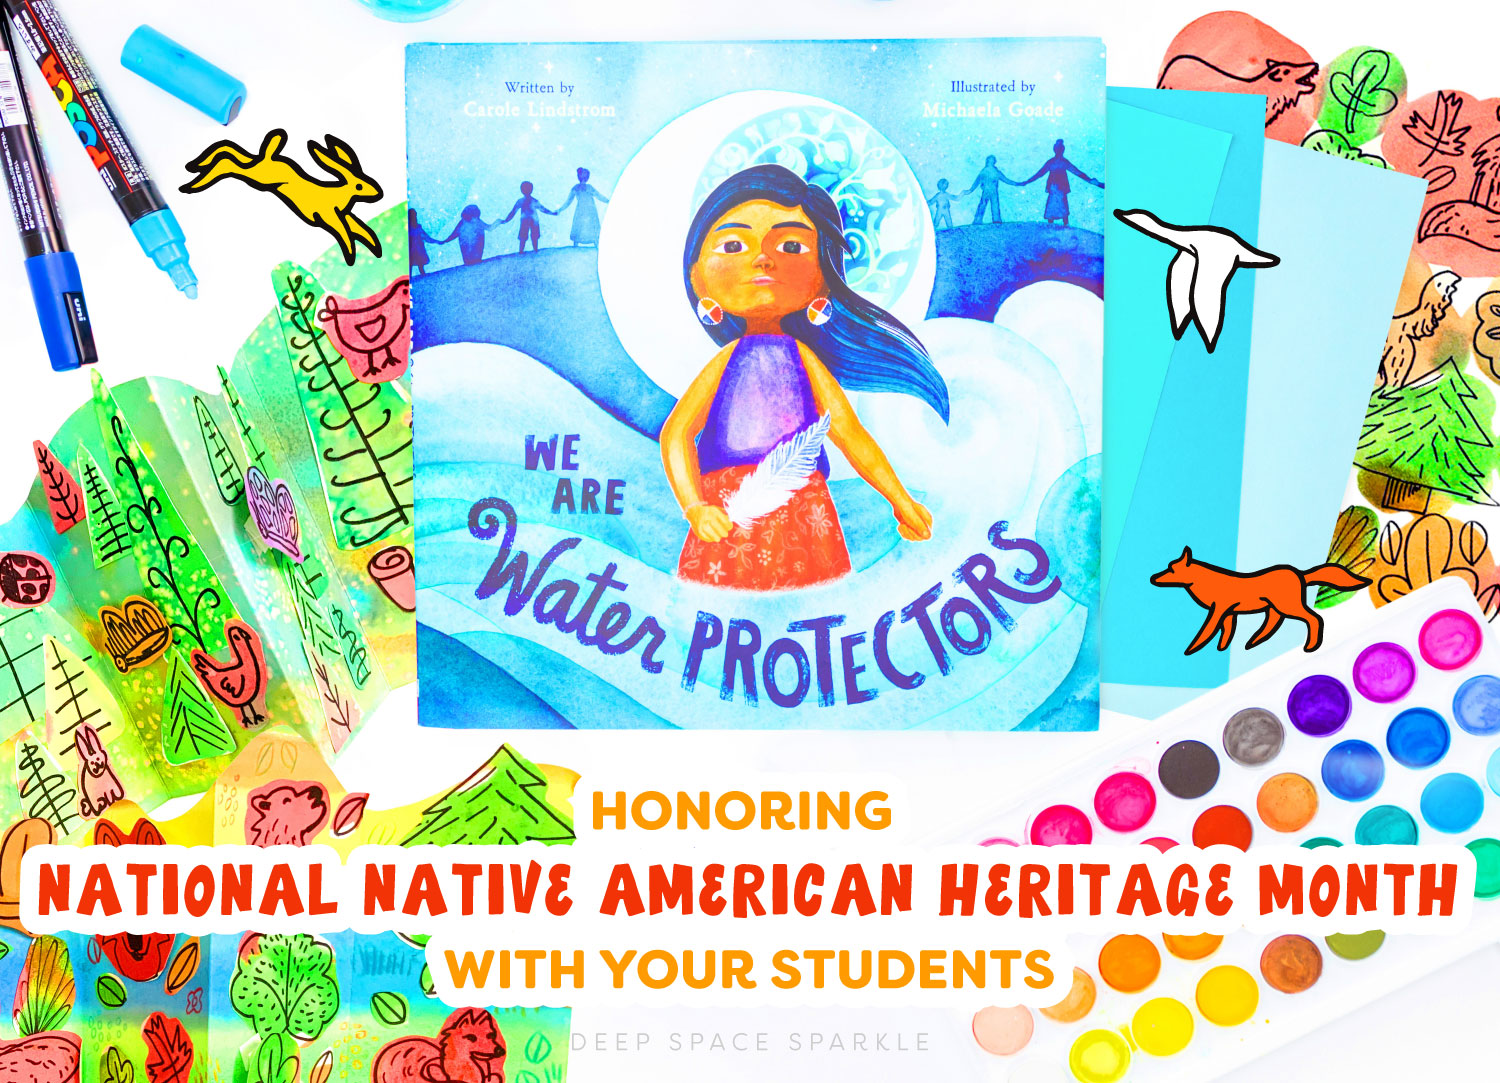 Honoring Native American Heritage Month with your students